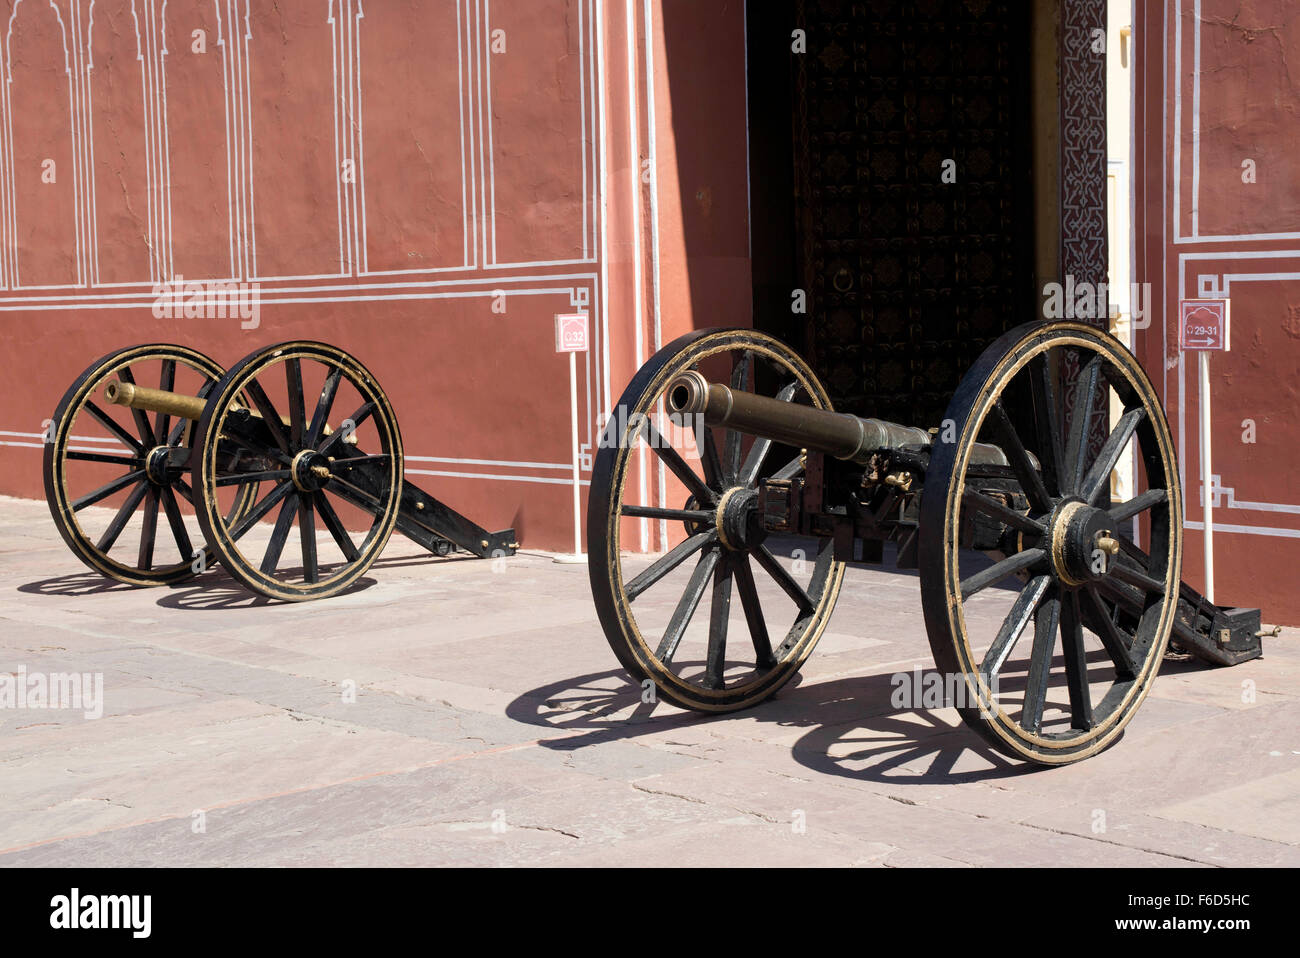 Cannons in entrance of diwan i aam city palace, jaipur, rajasthan, india, asia Stock Photo